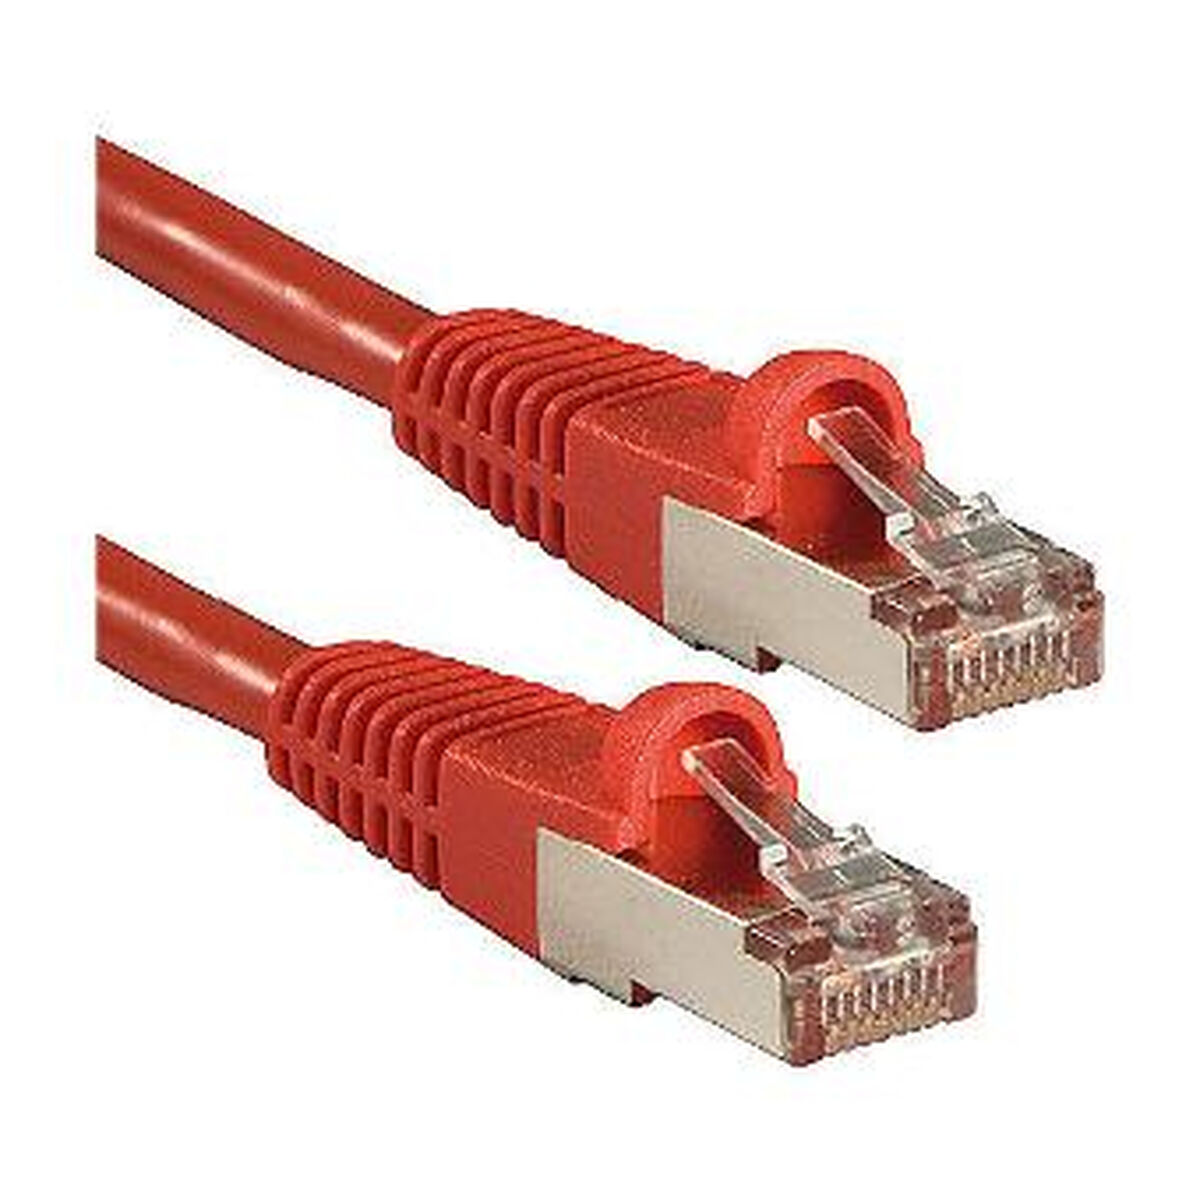 UTP Category 6 Rigid Network Cable LINDY 47164 2 m Red 1 Unit